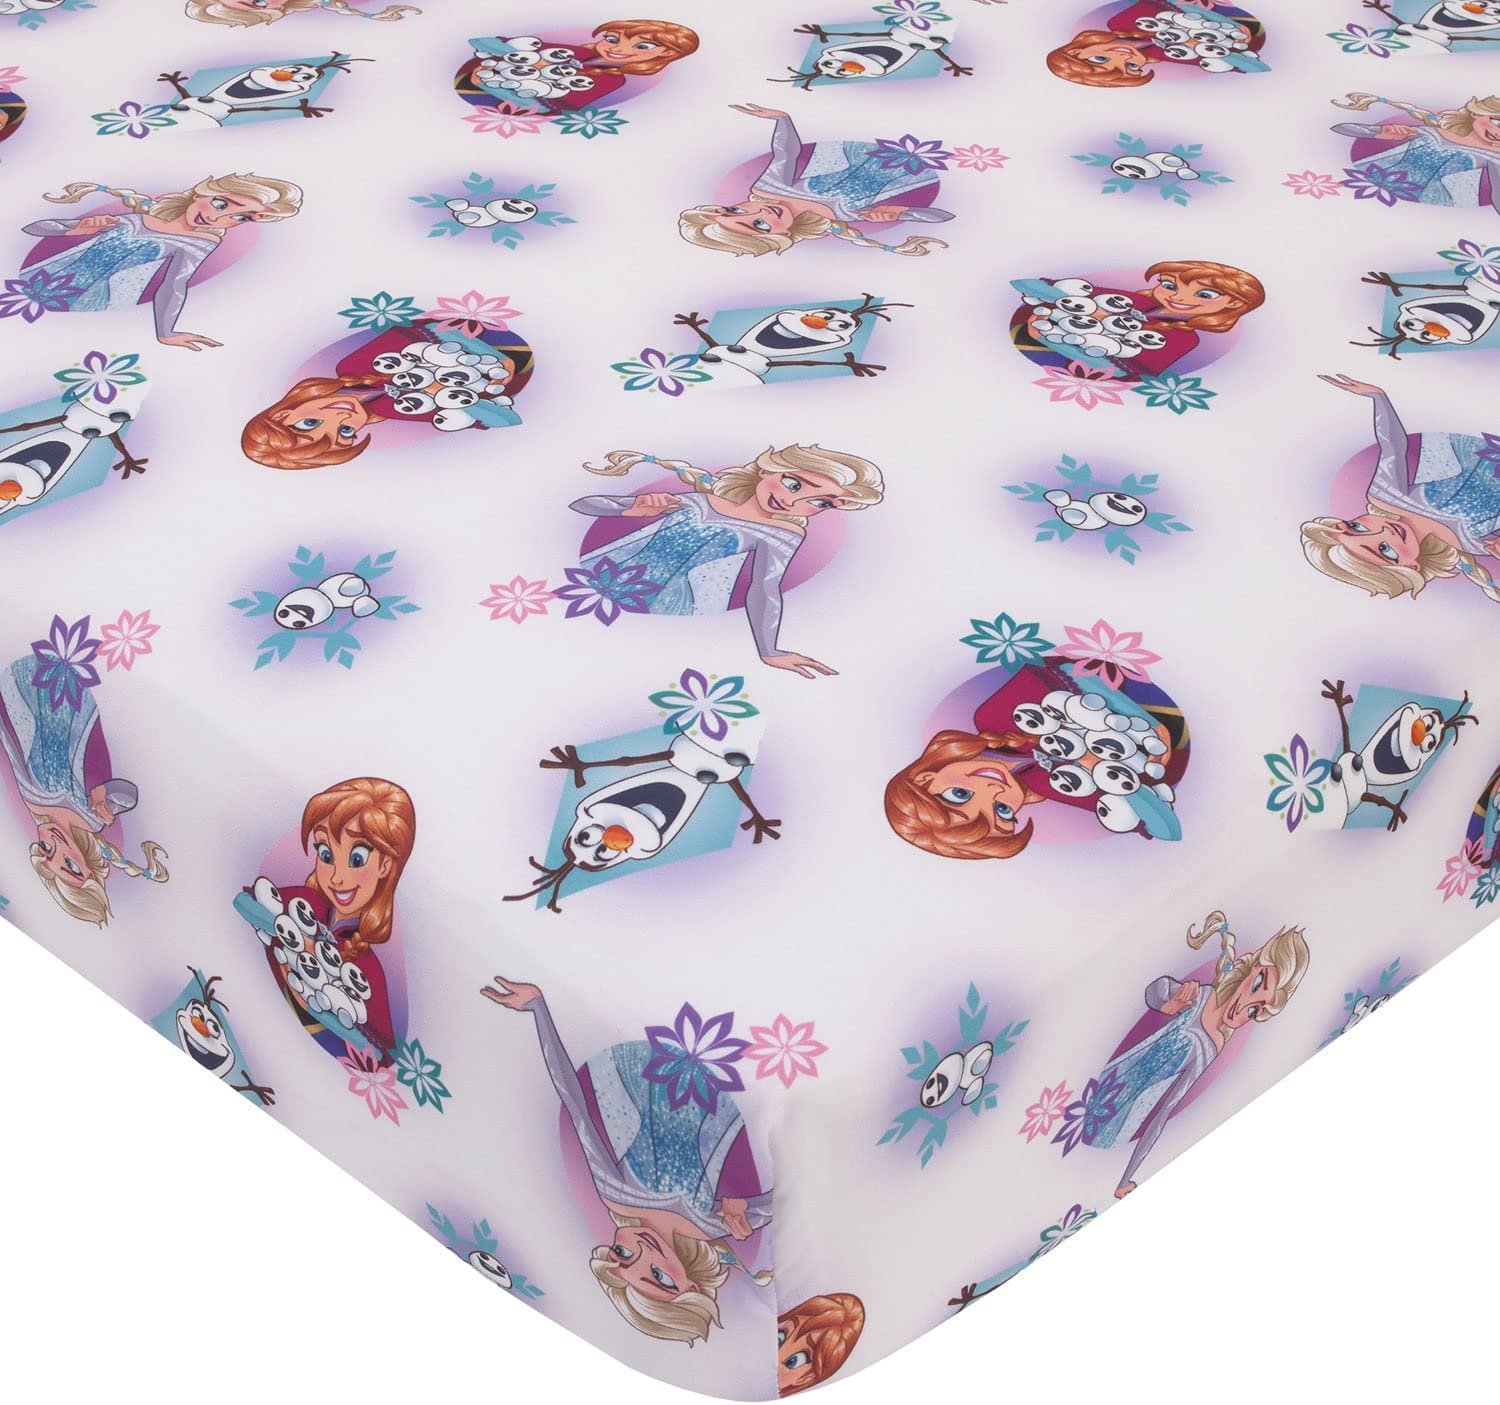 Disney Frozen Fitted Crib Sheet 100% Soft Microfiber, Baby Sheet, Fits Standard Size Crib Mattress 28in x 52in - image 1 of 4